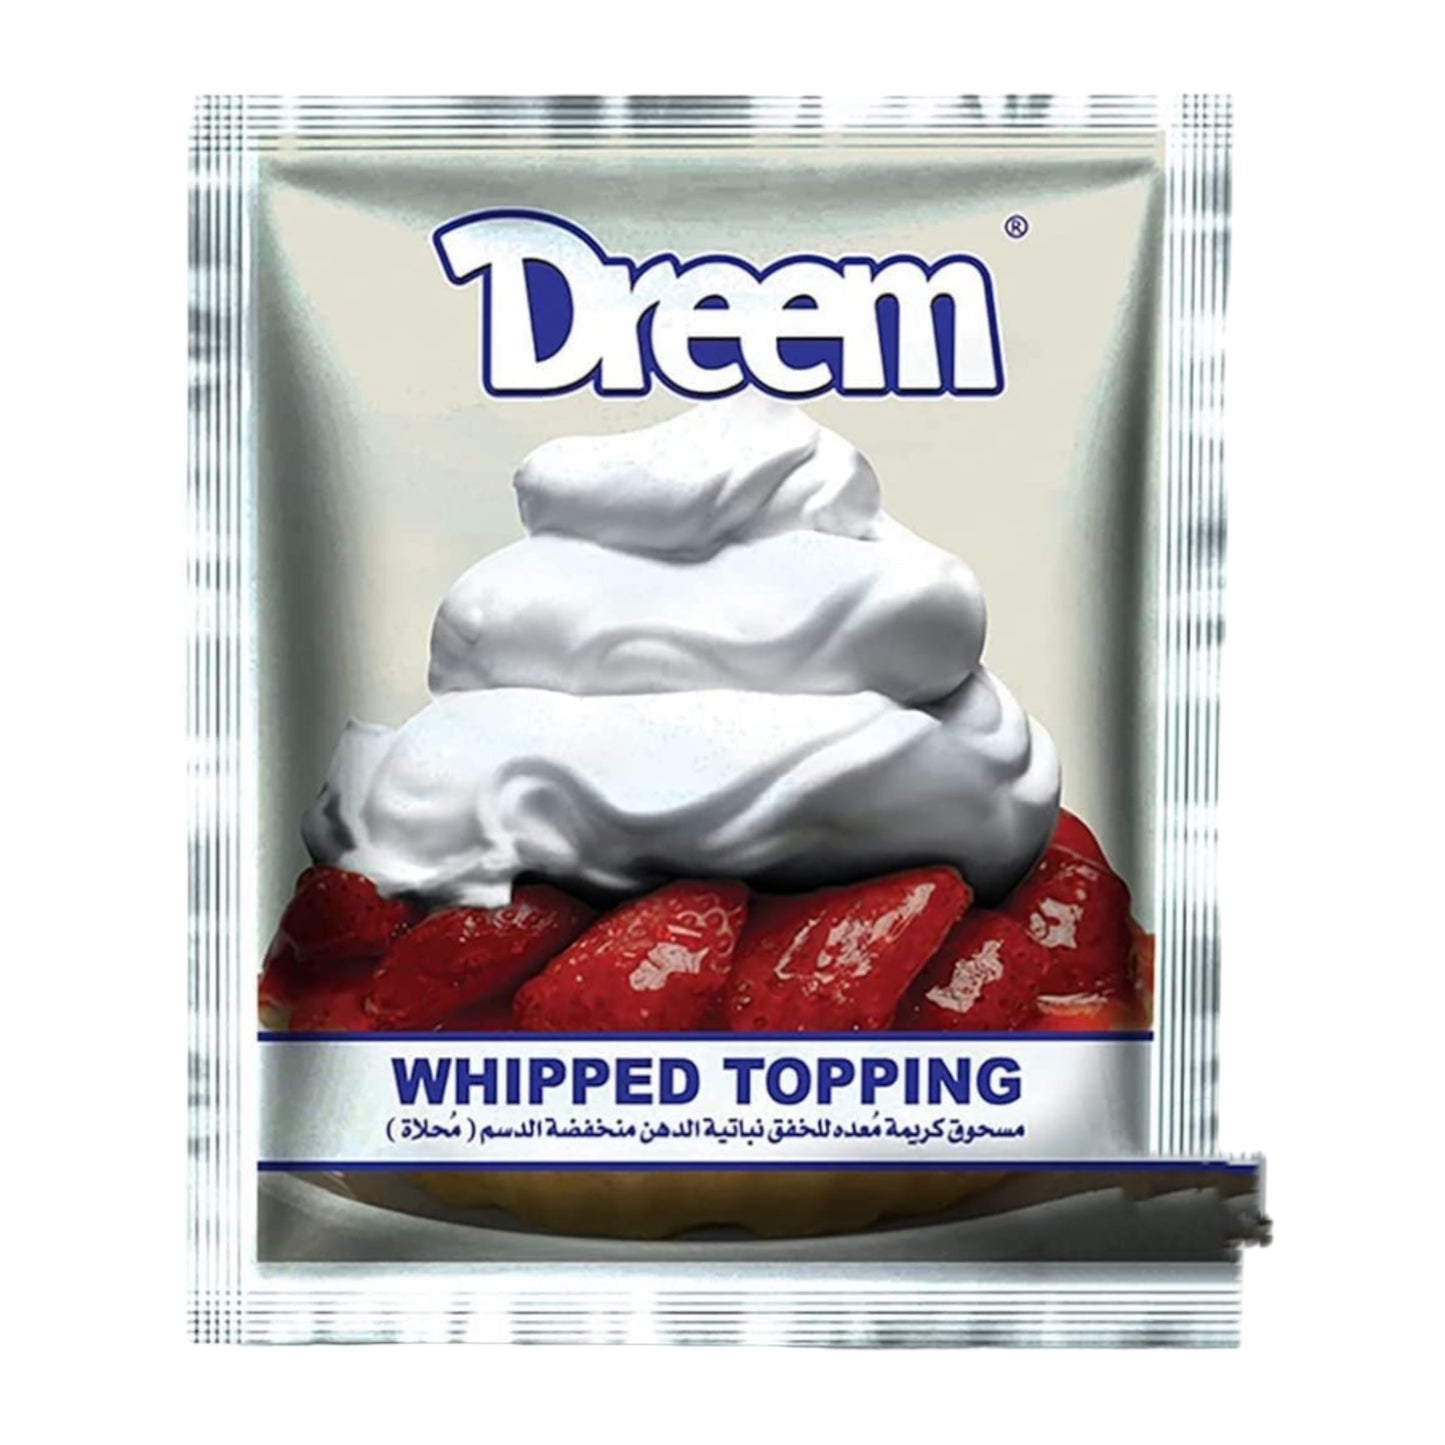 Dreem Whipped Topping